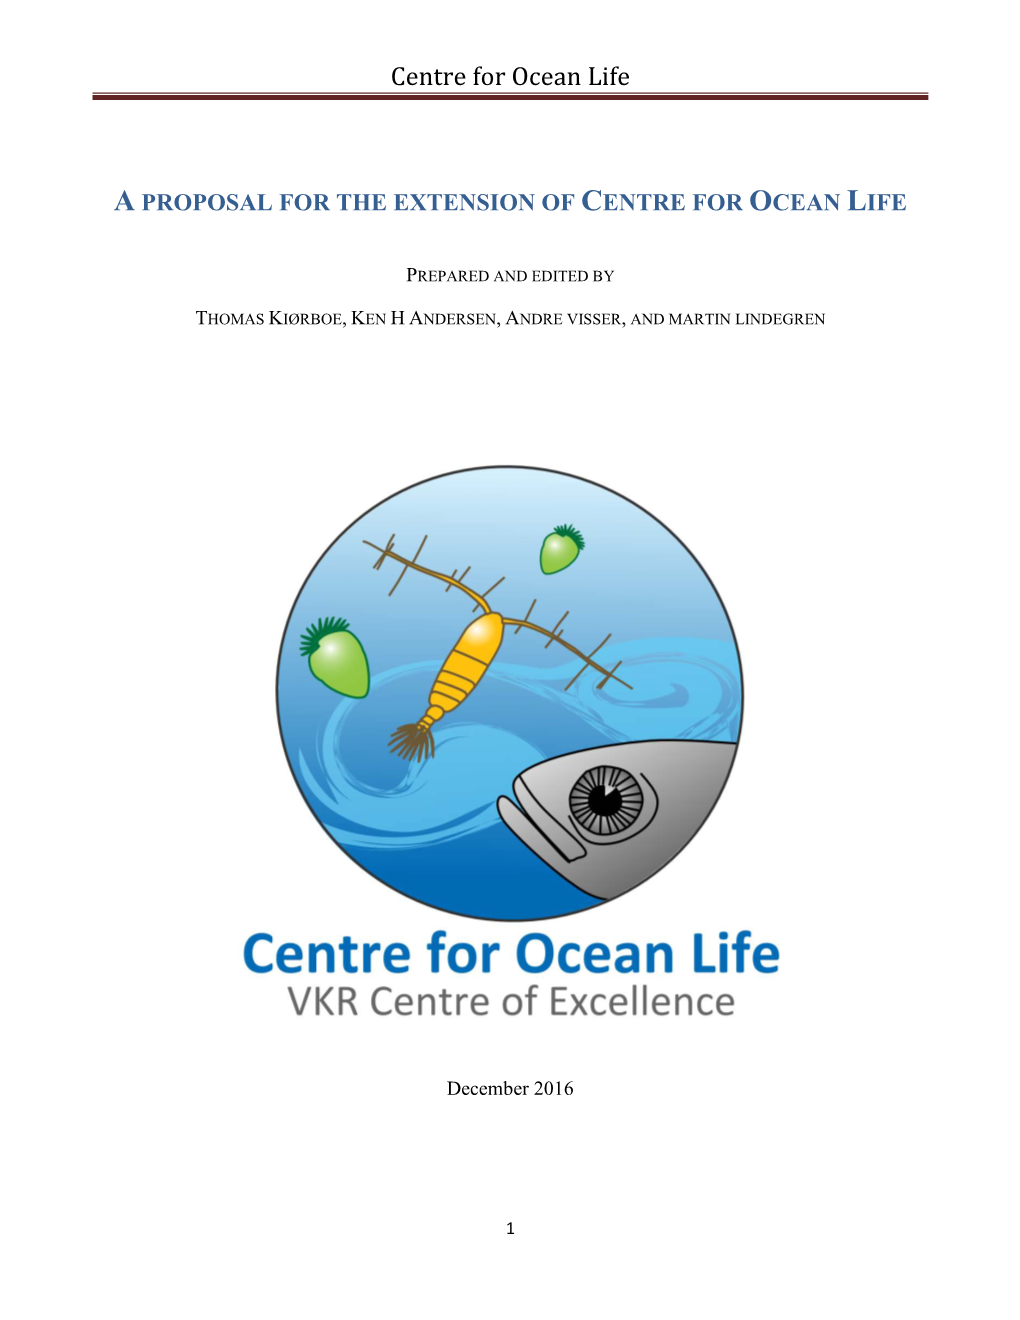 Download Extension of Centre for Ocean